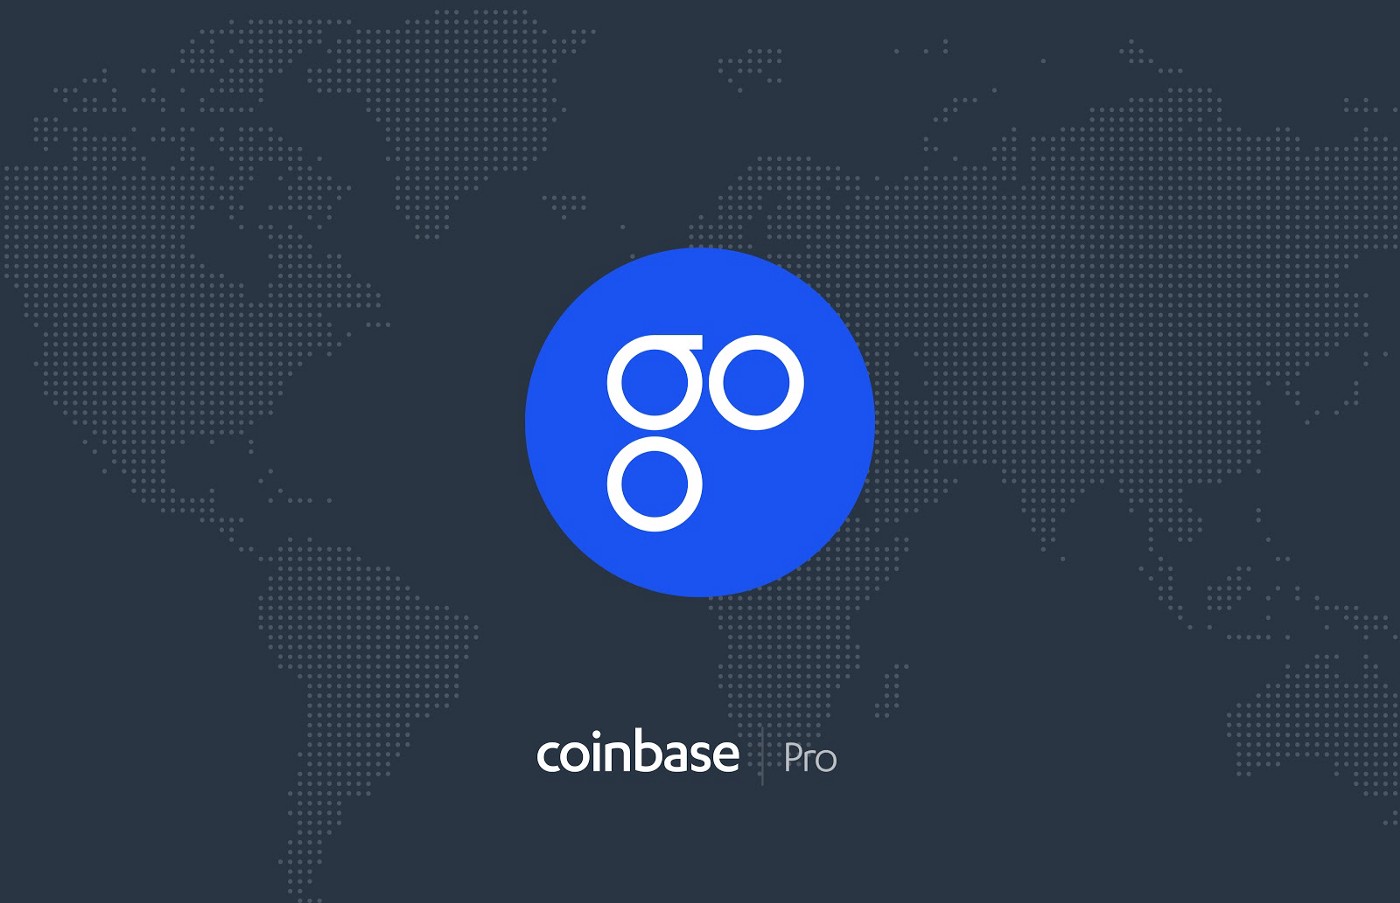 OmiseGO (OMG) is launching on Coinbase Pro